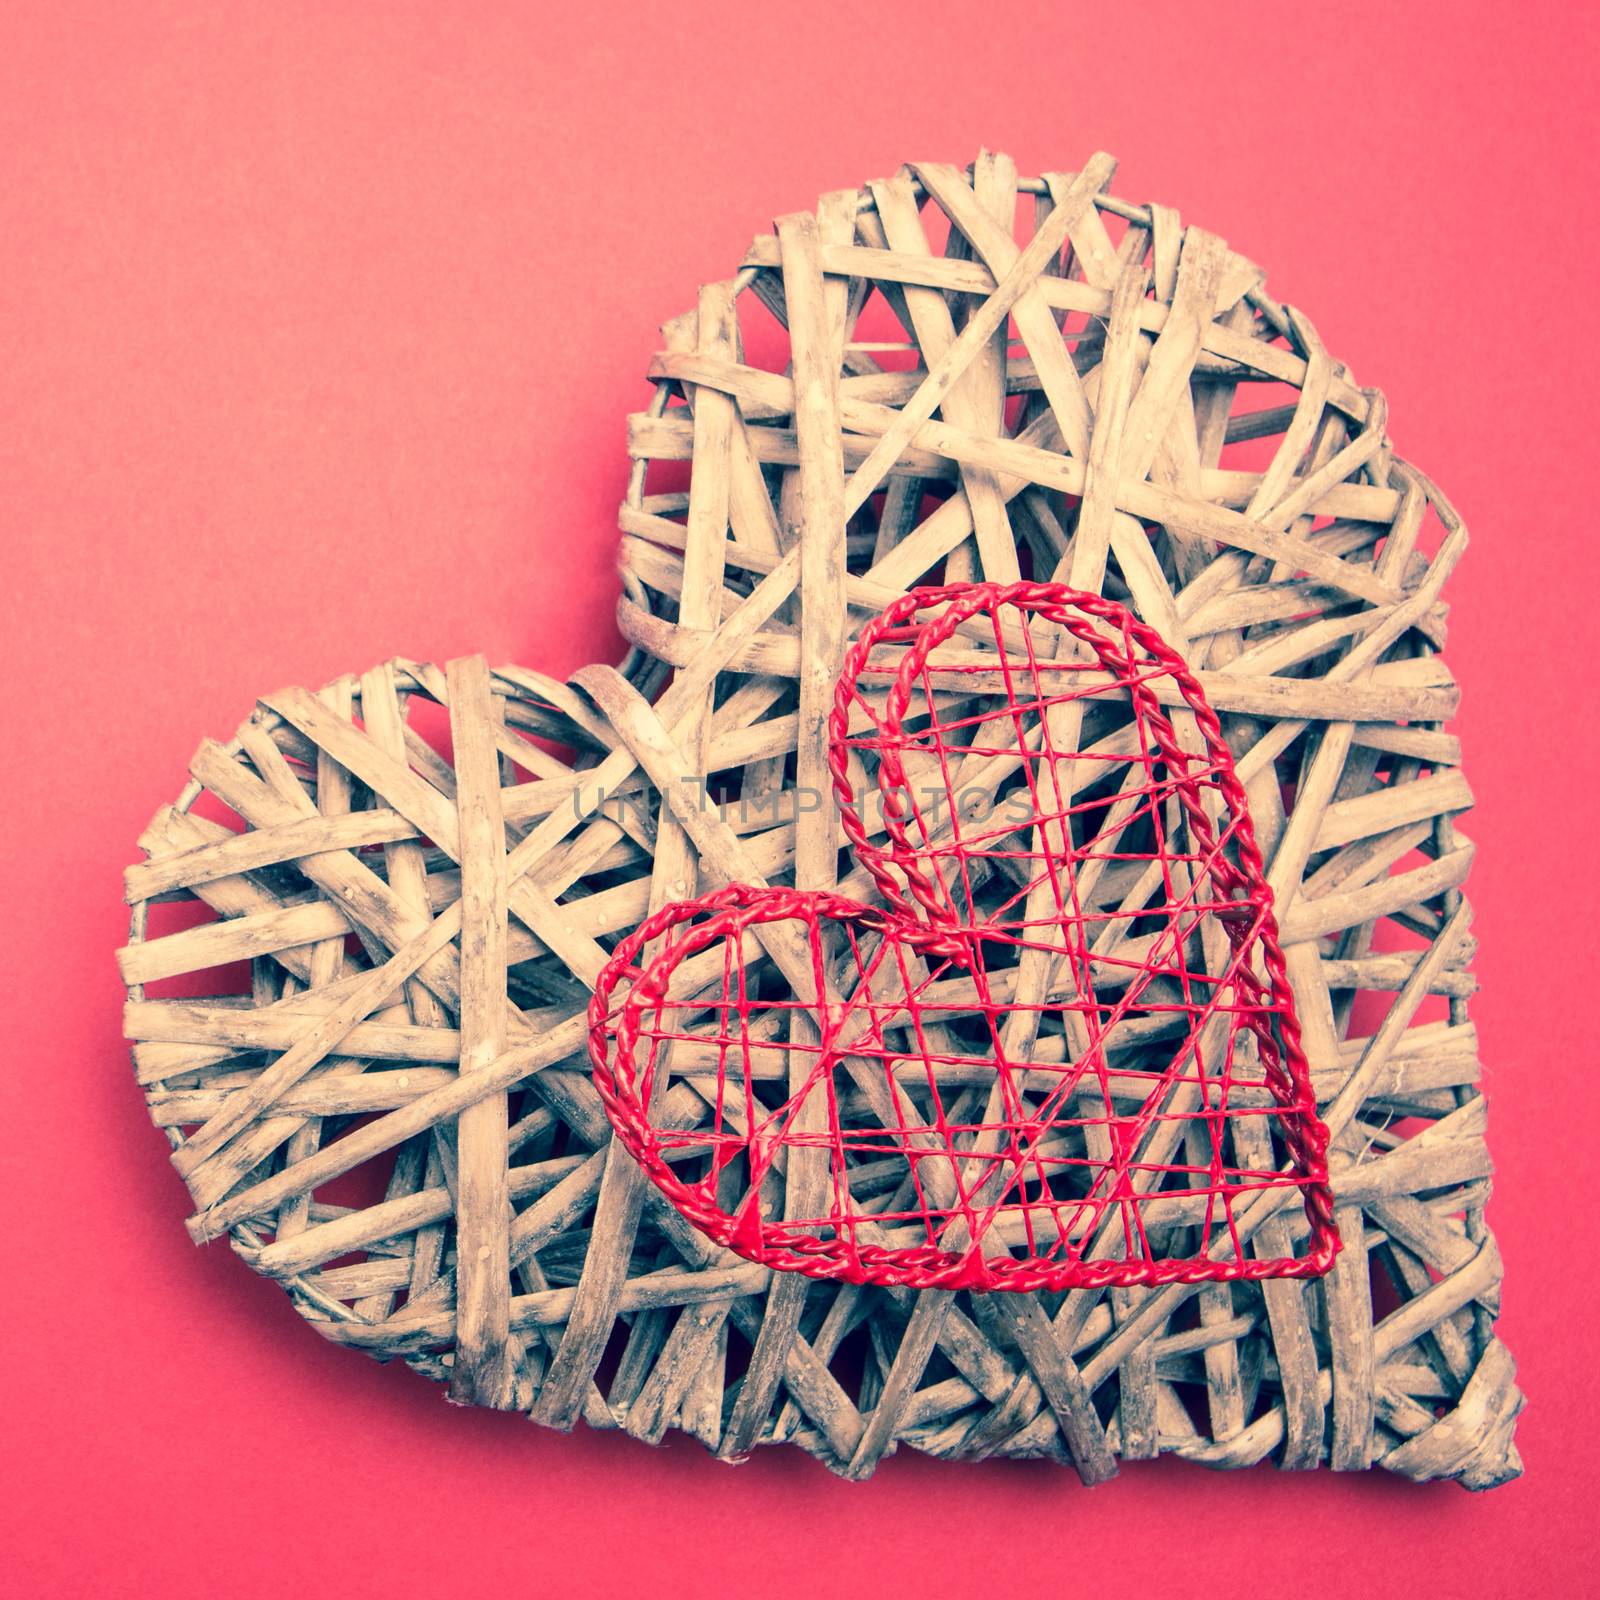 Wicker heart ornament with heart shaped box on pink background